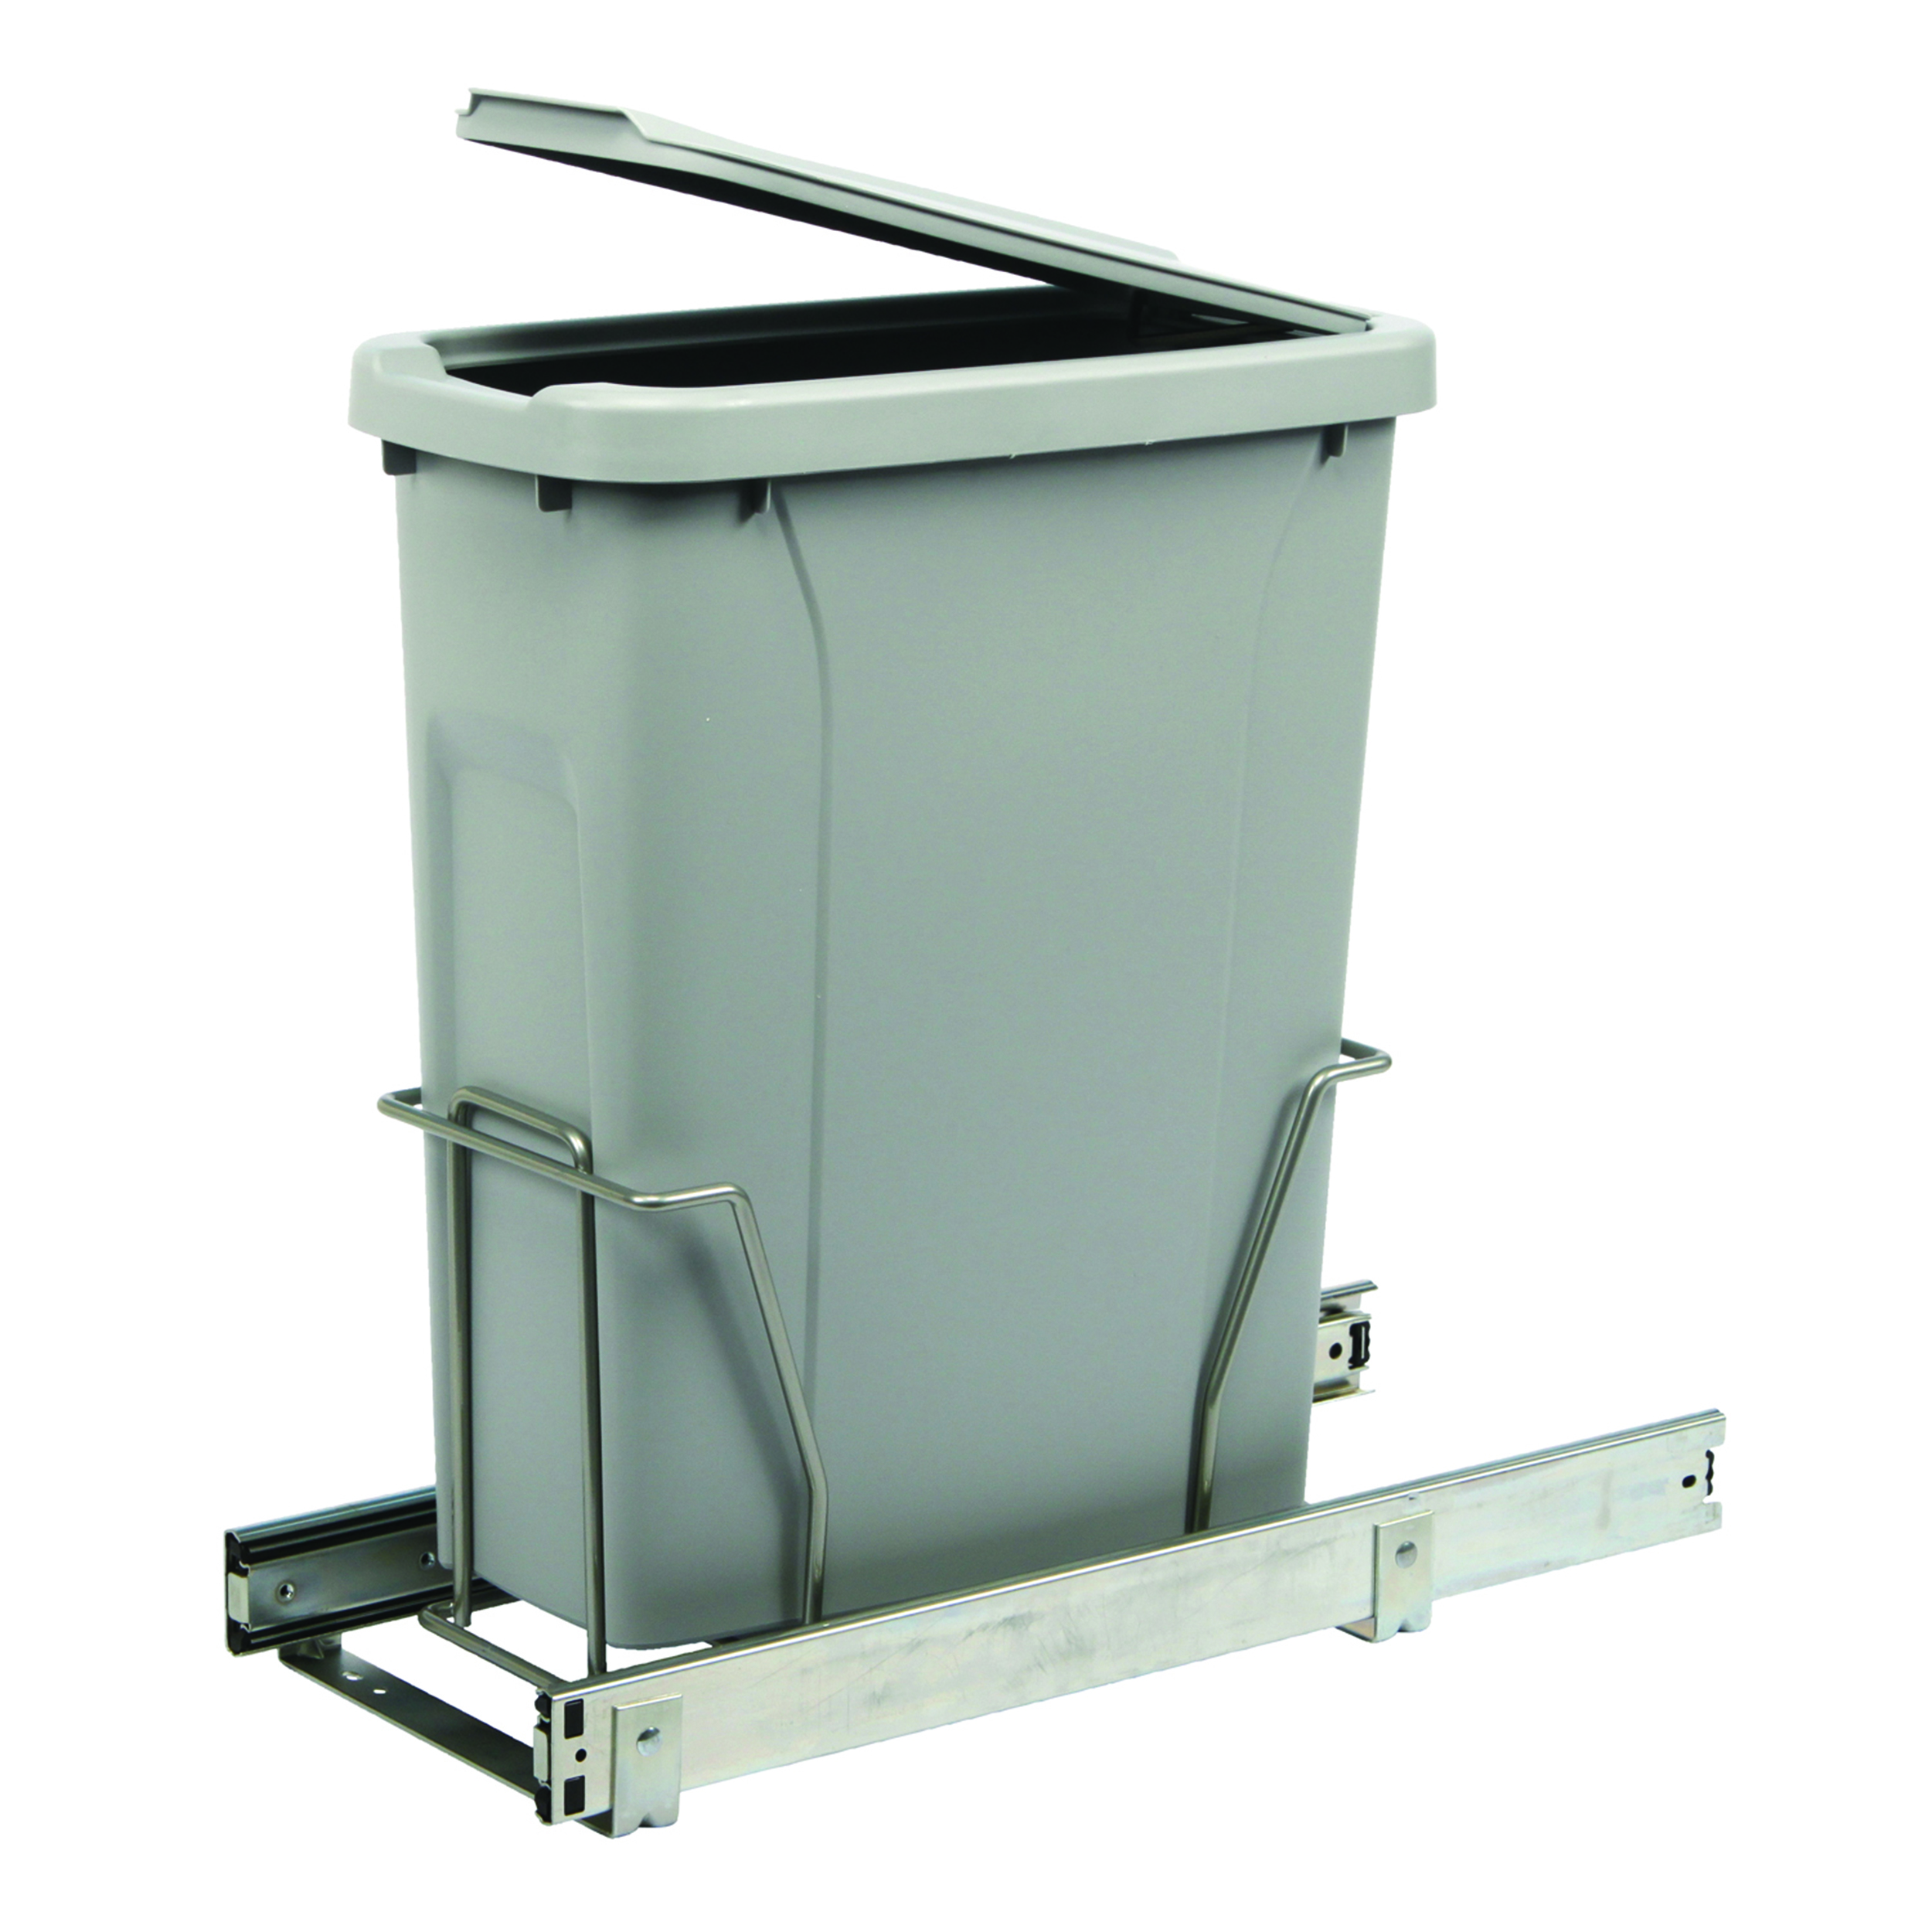 Real Solutions Single 20qt Pull-out Waste & Recyling Unit With Lid, Platinum